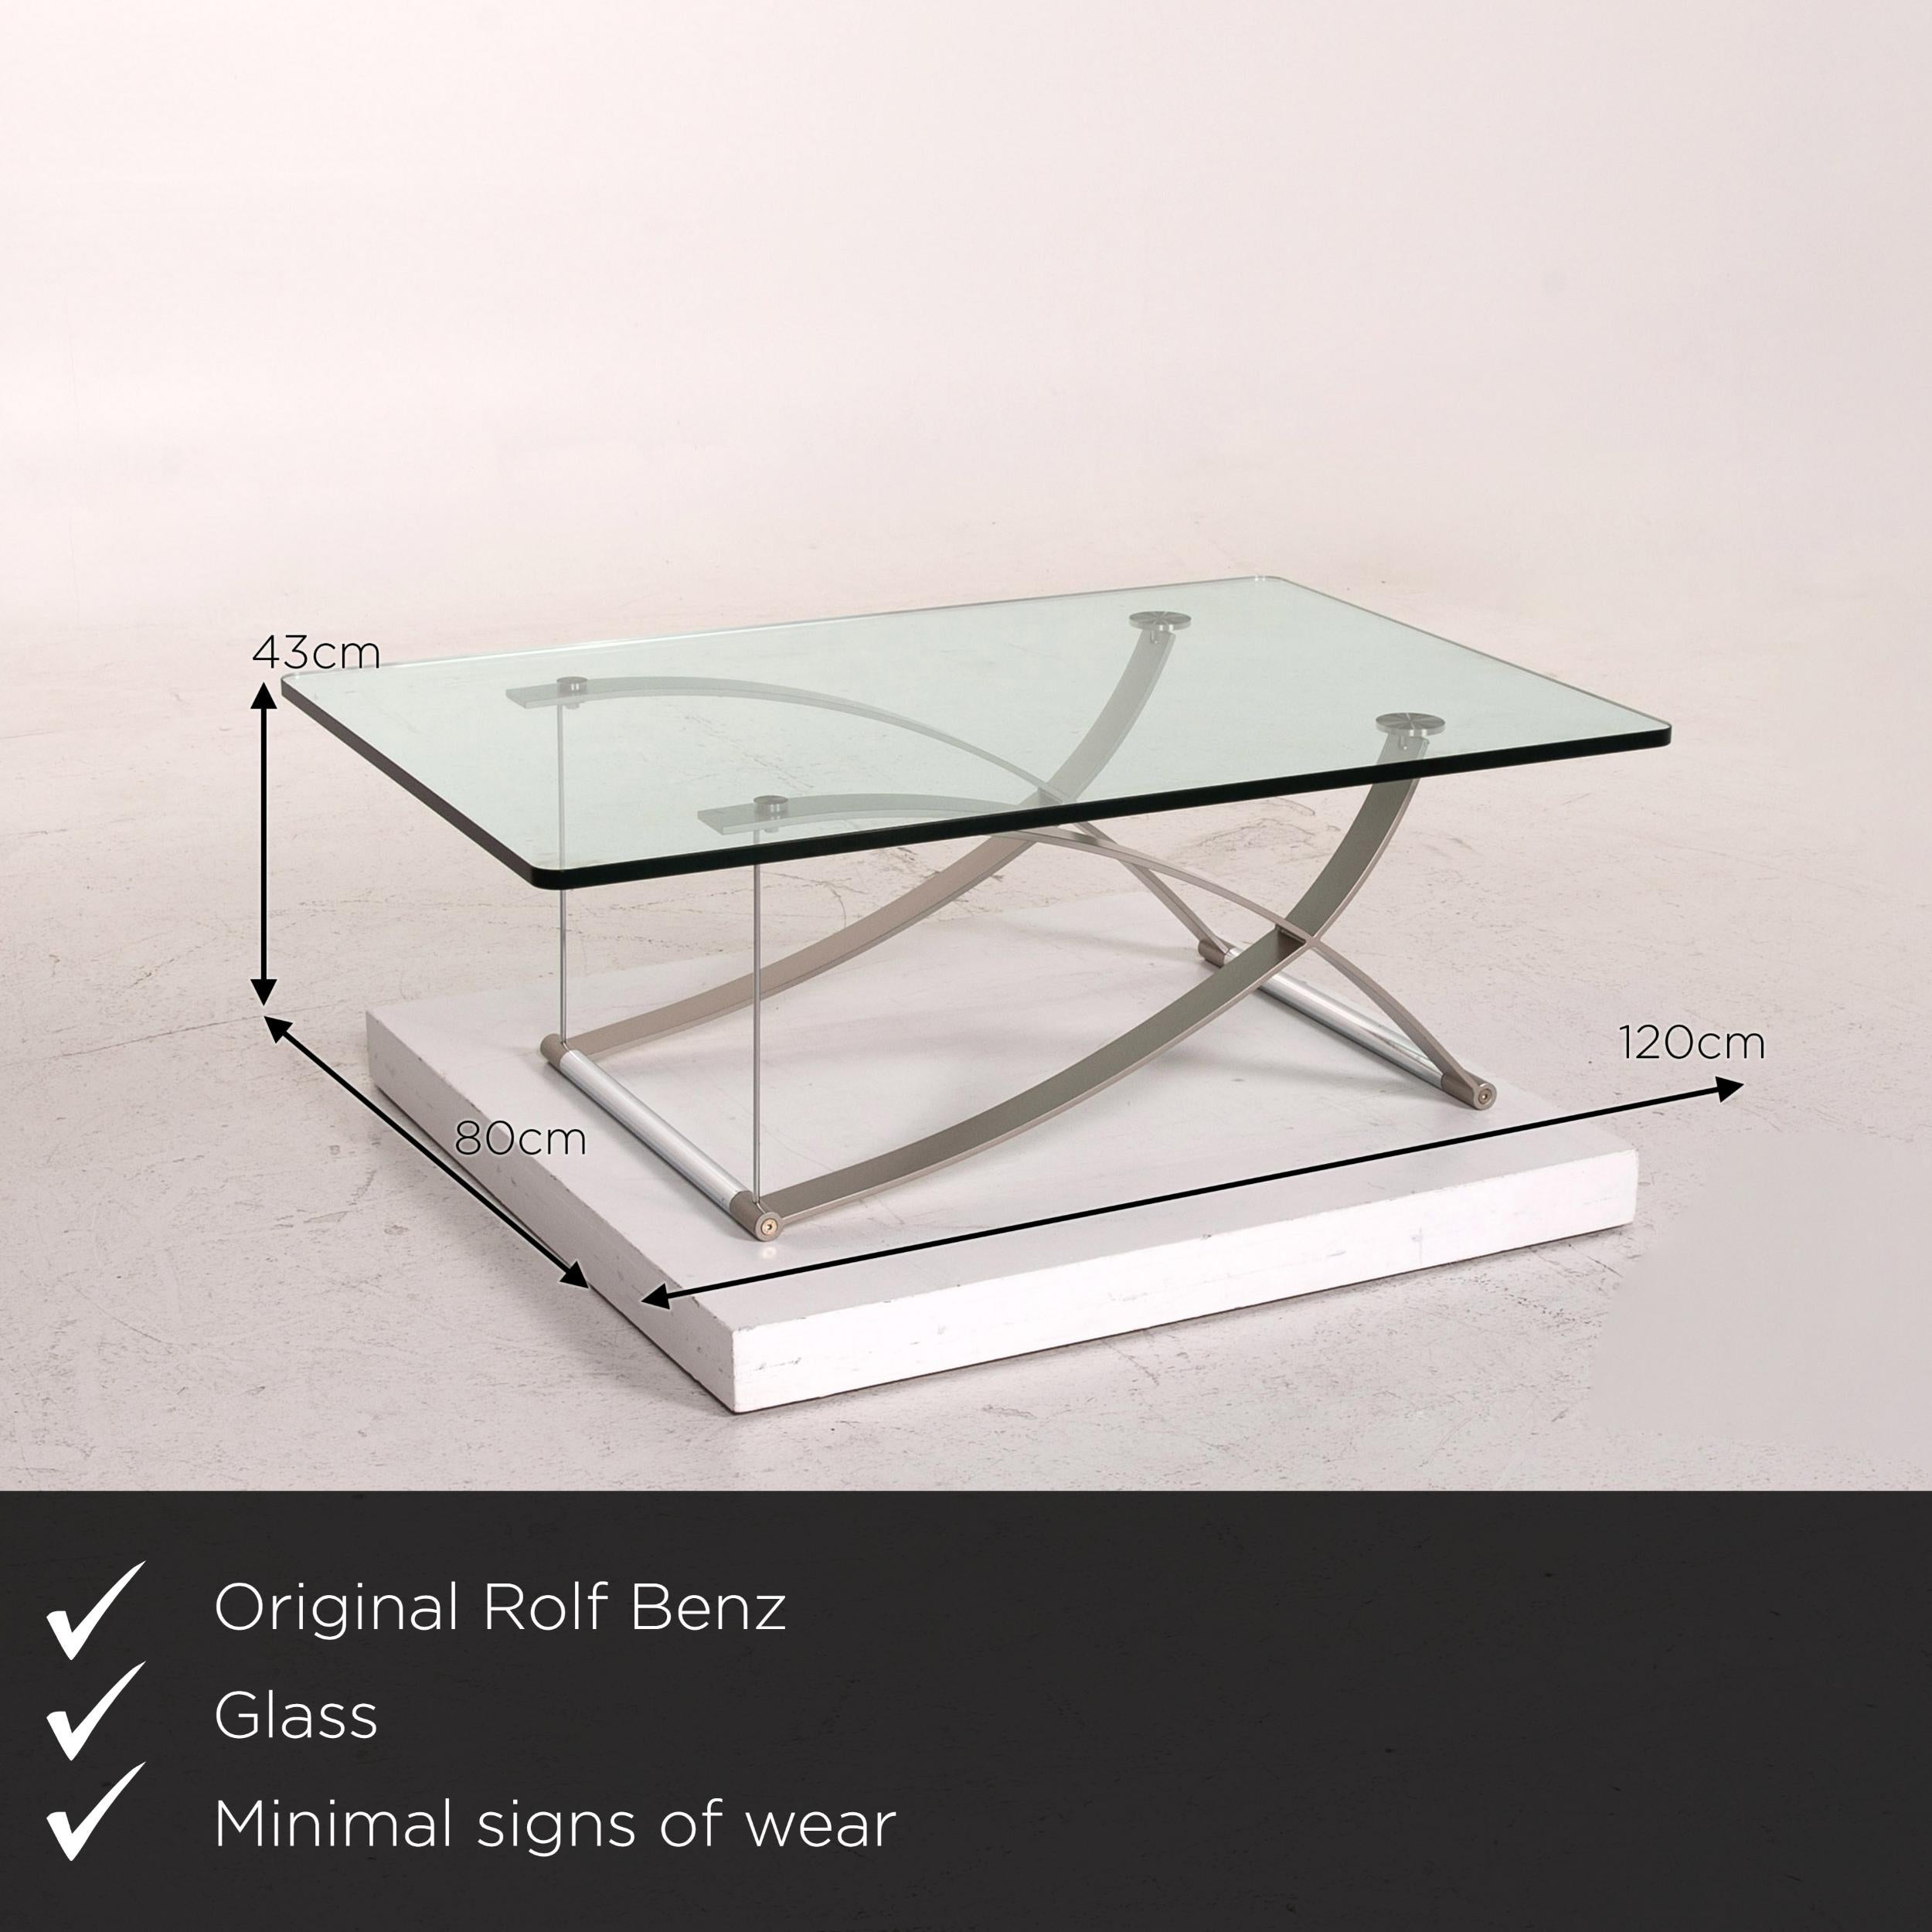 We present to you a Rolf Benz RB 1150 glass coffee table metal table.

 

 Product measurements in centimetres:
 

 depth: 80
 width: 120
 height: 43
 seat height: 
 rest height: 
 seat depth: 
 seat width: 
 back height: